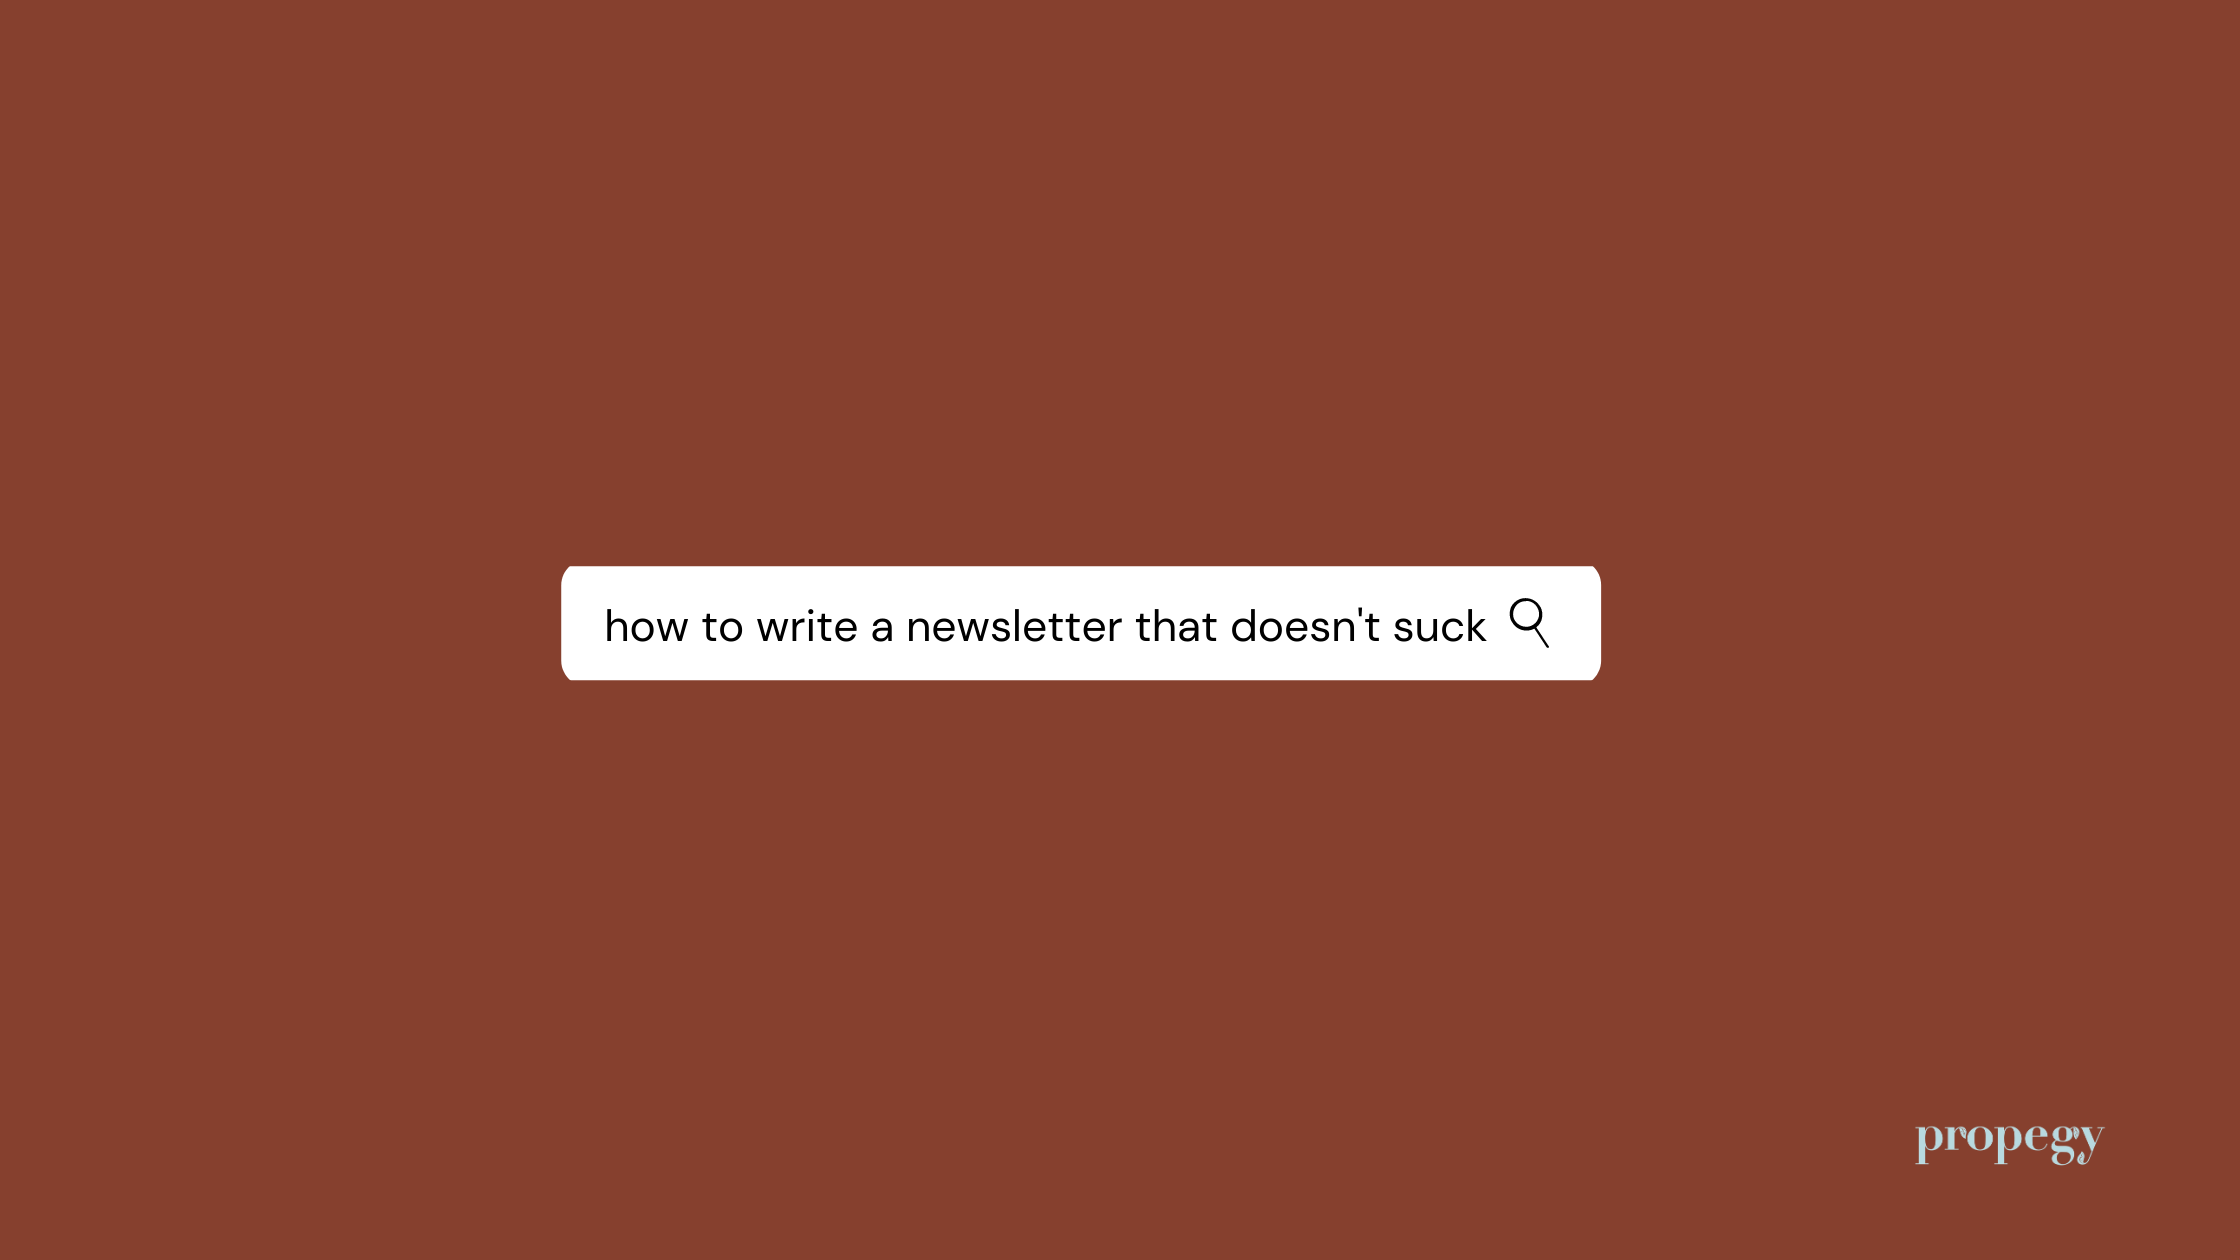 Creating a Newsletter That Doesn’t Suck